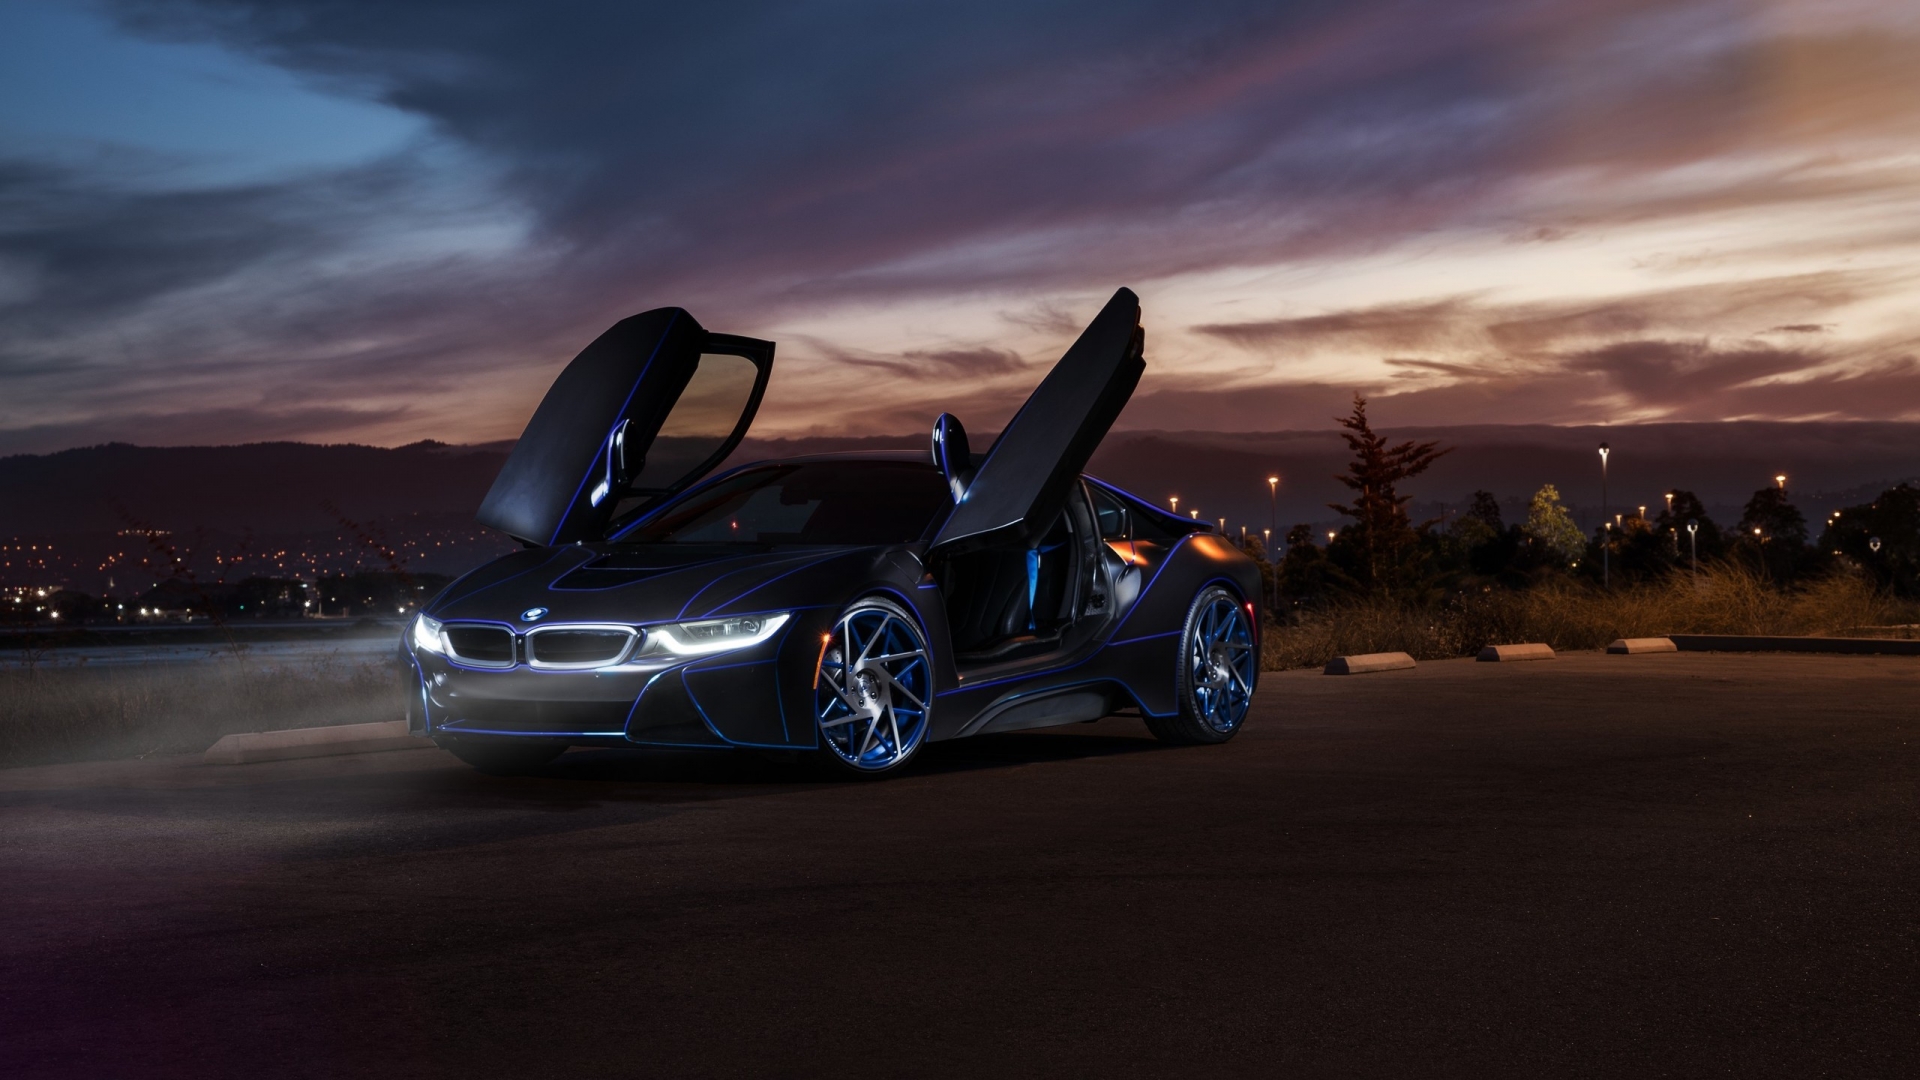 Gorgeous New BMW i8 for 1920 x 1080 HDTV 1080p resolution